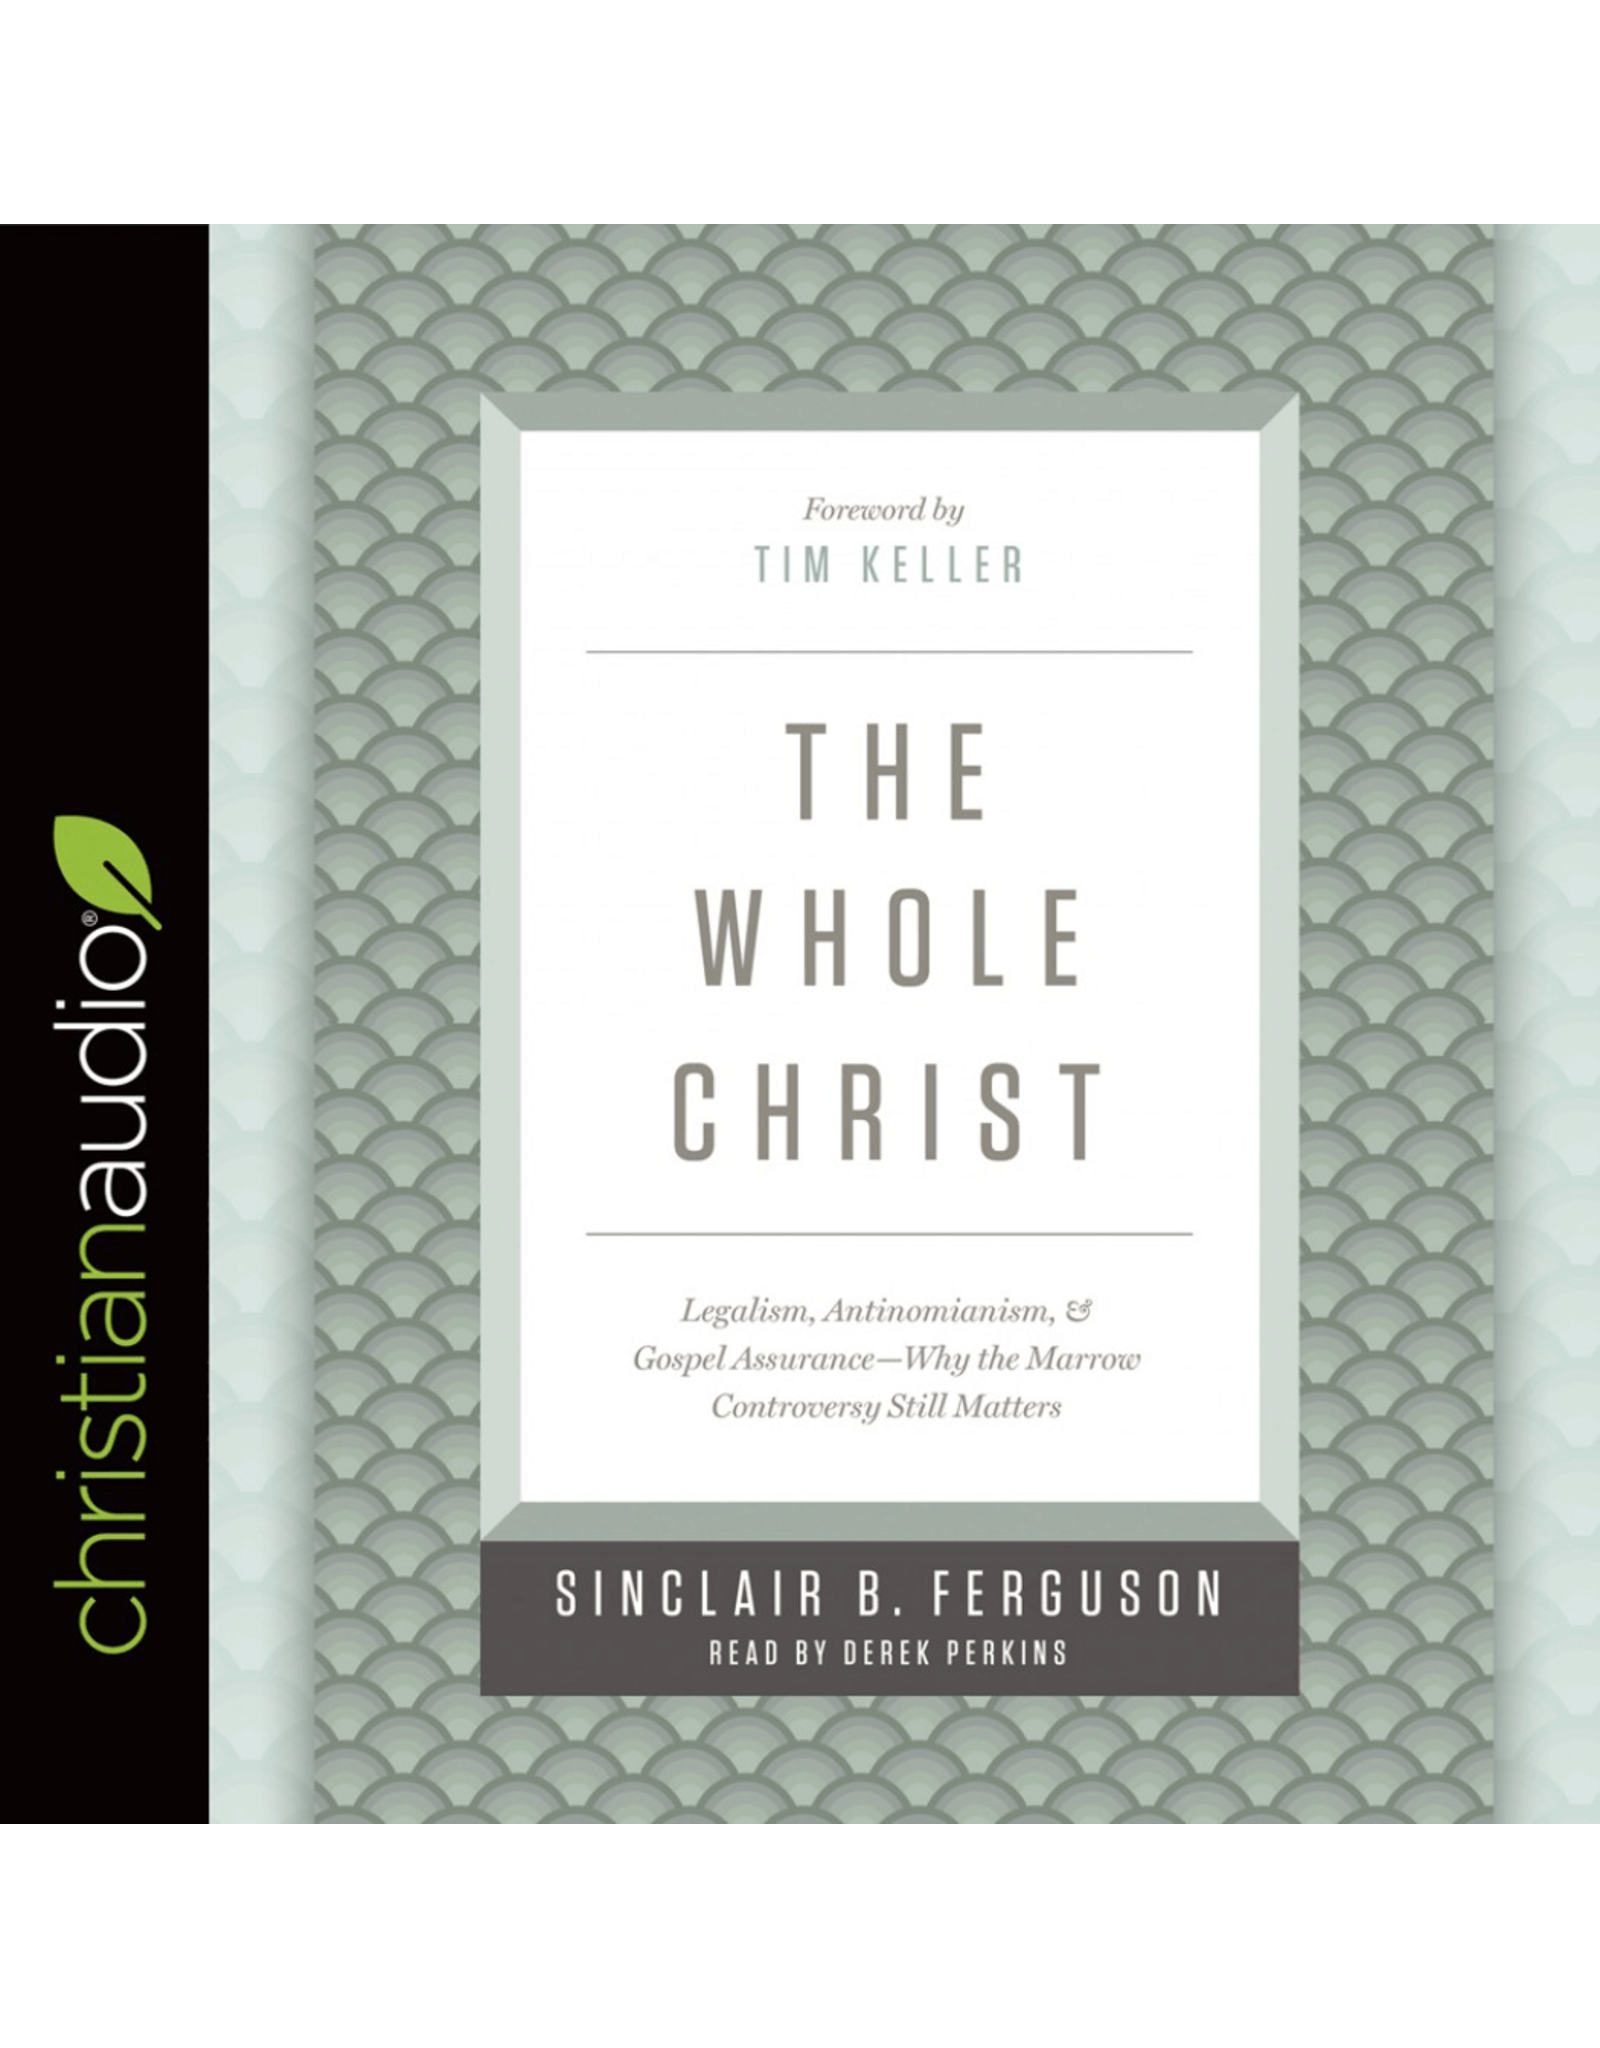 eChristian The Whole Christ: Legalism, Antinomianism, & Gospel Assurance - Why the Marrow Controversy Still Matters (Audio CD)